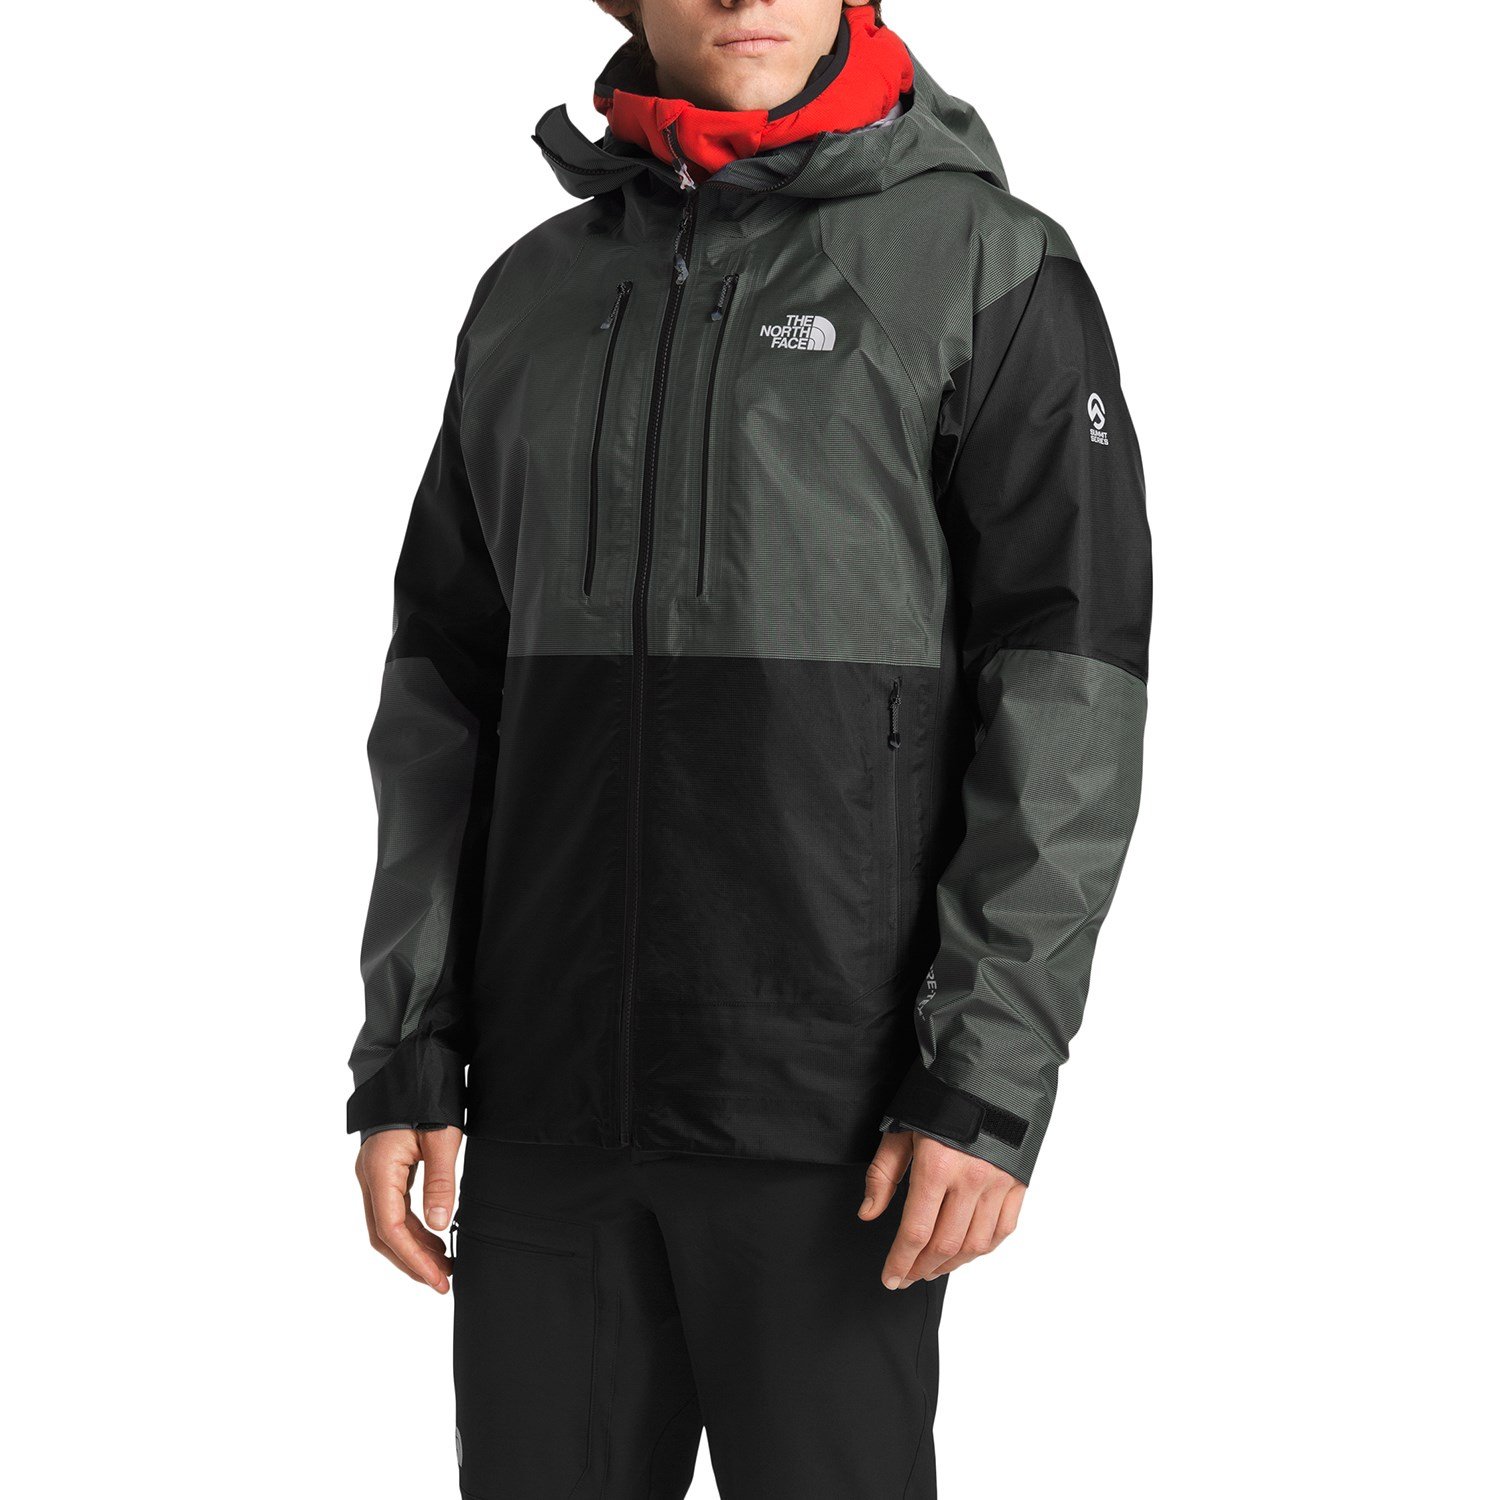 The North Face Summit L5 FuseForm 